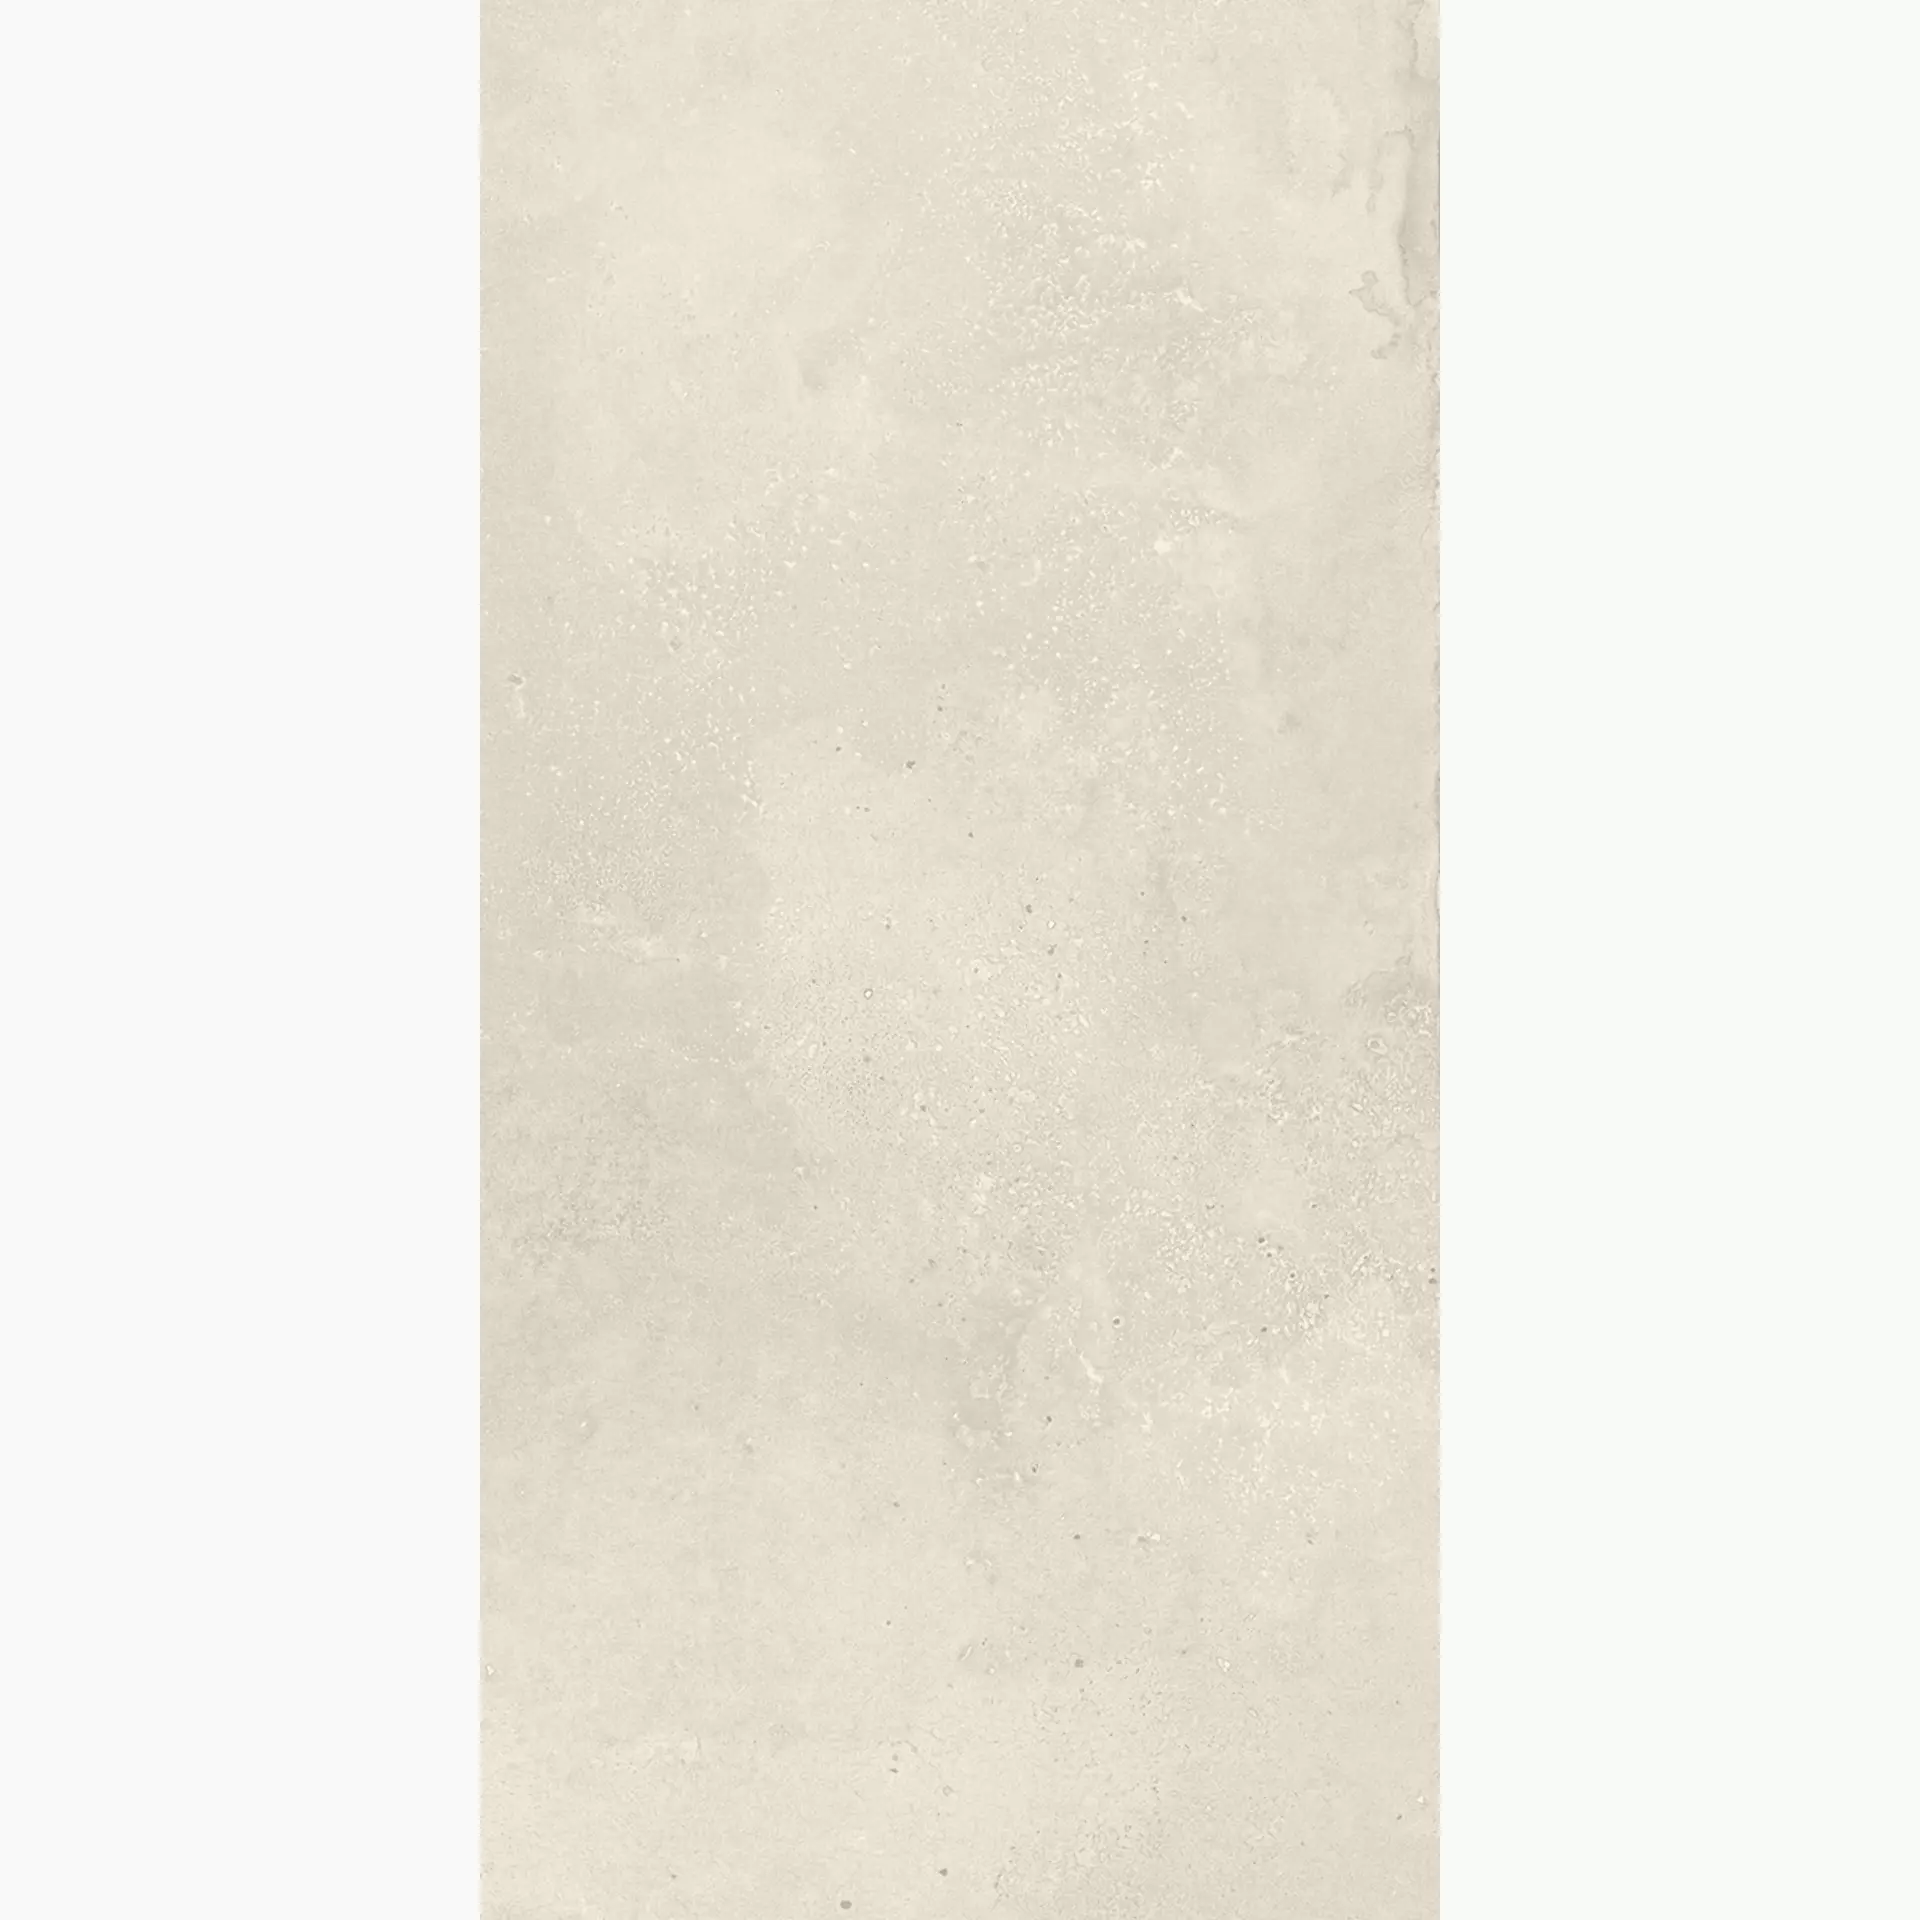 Fondovalle Pigmento Gesso Natural PGM015 60x120cm rectified 6,5mm